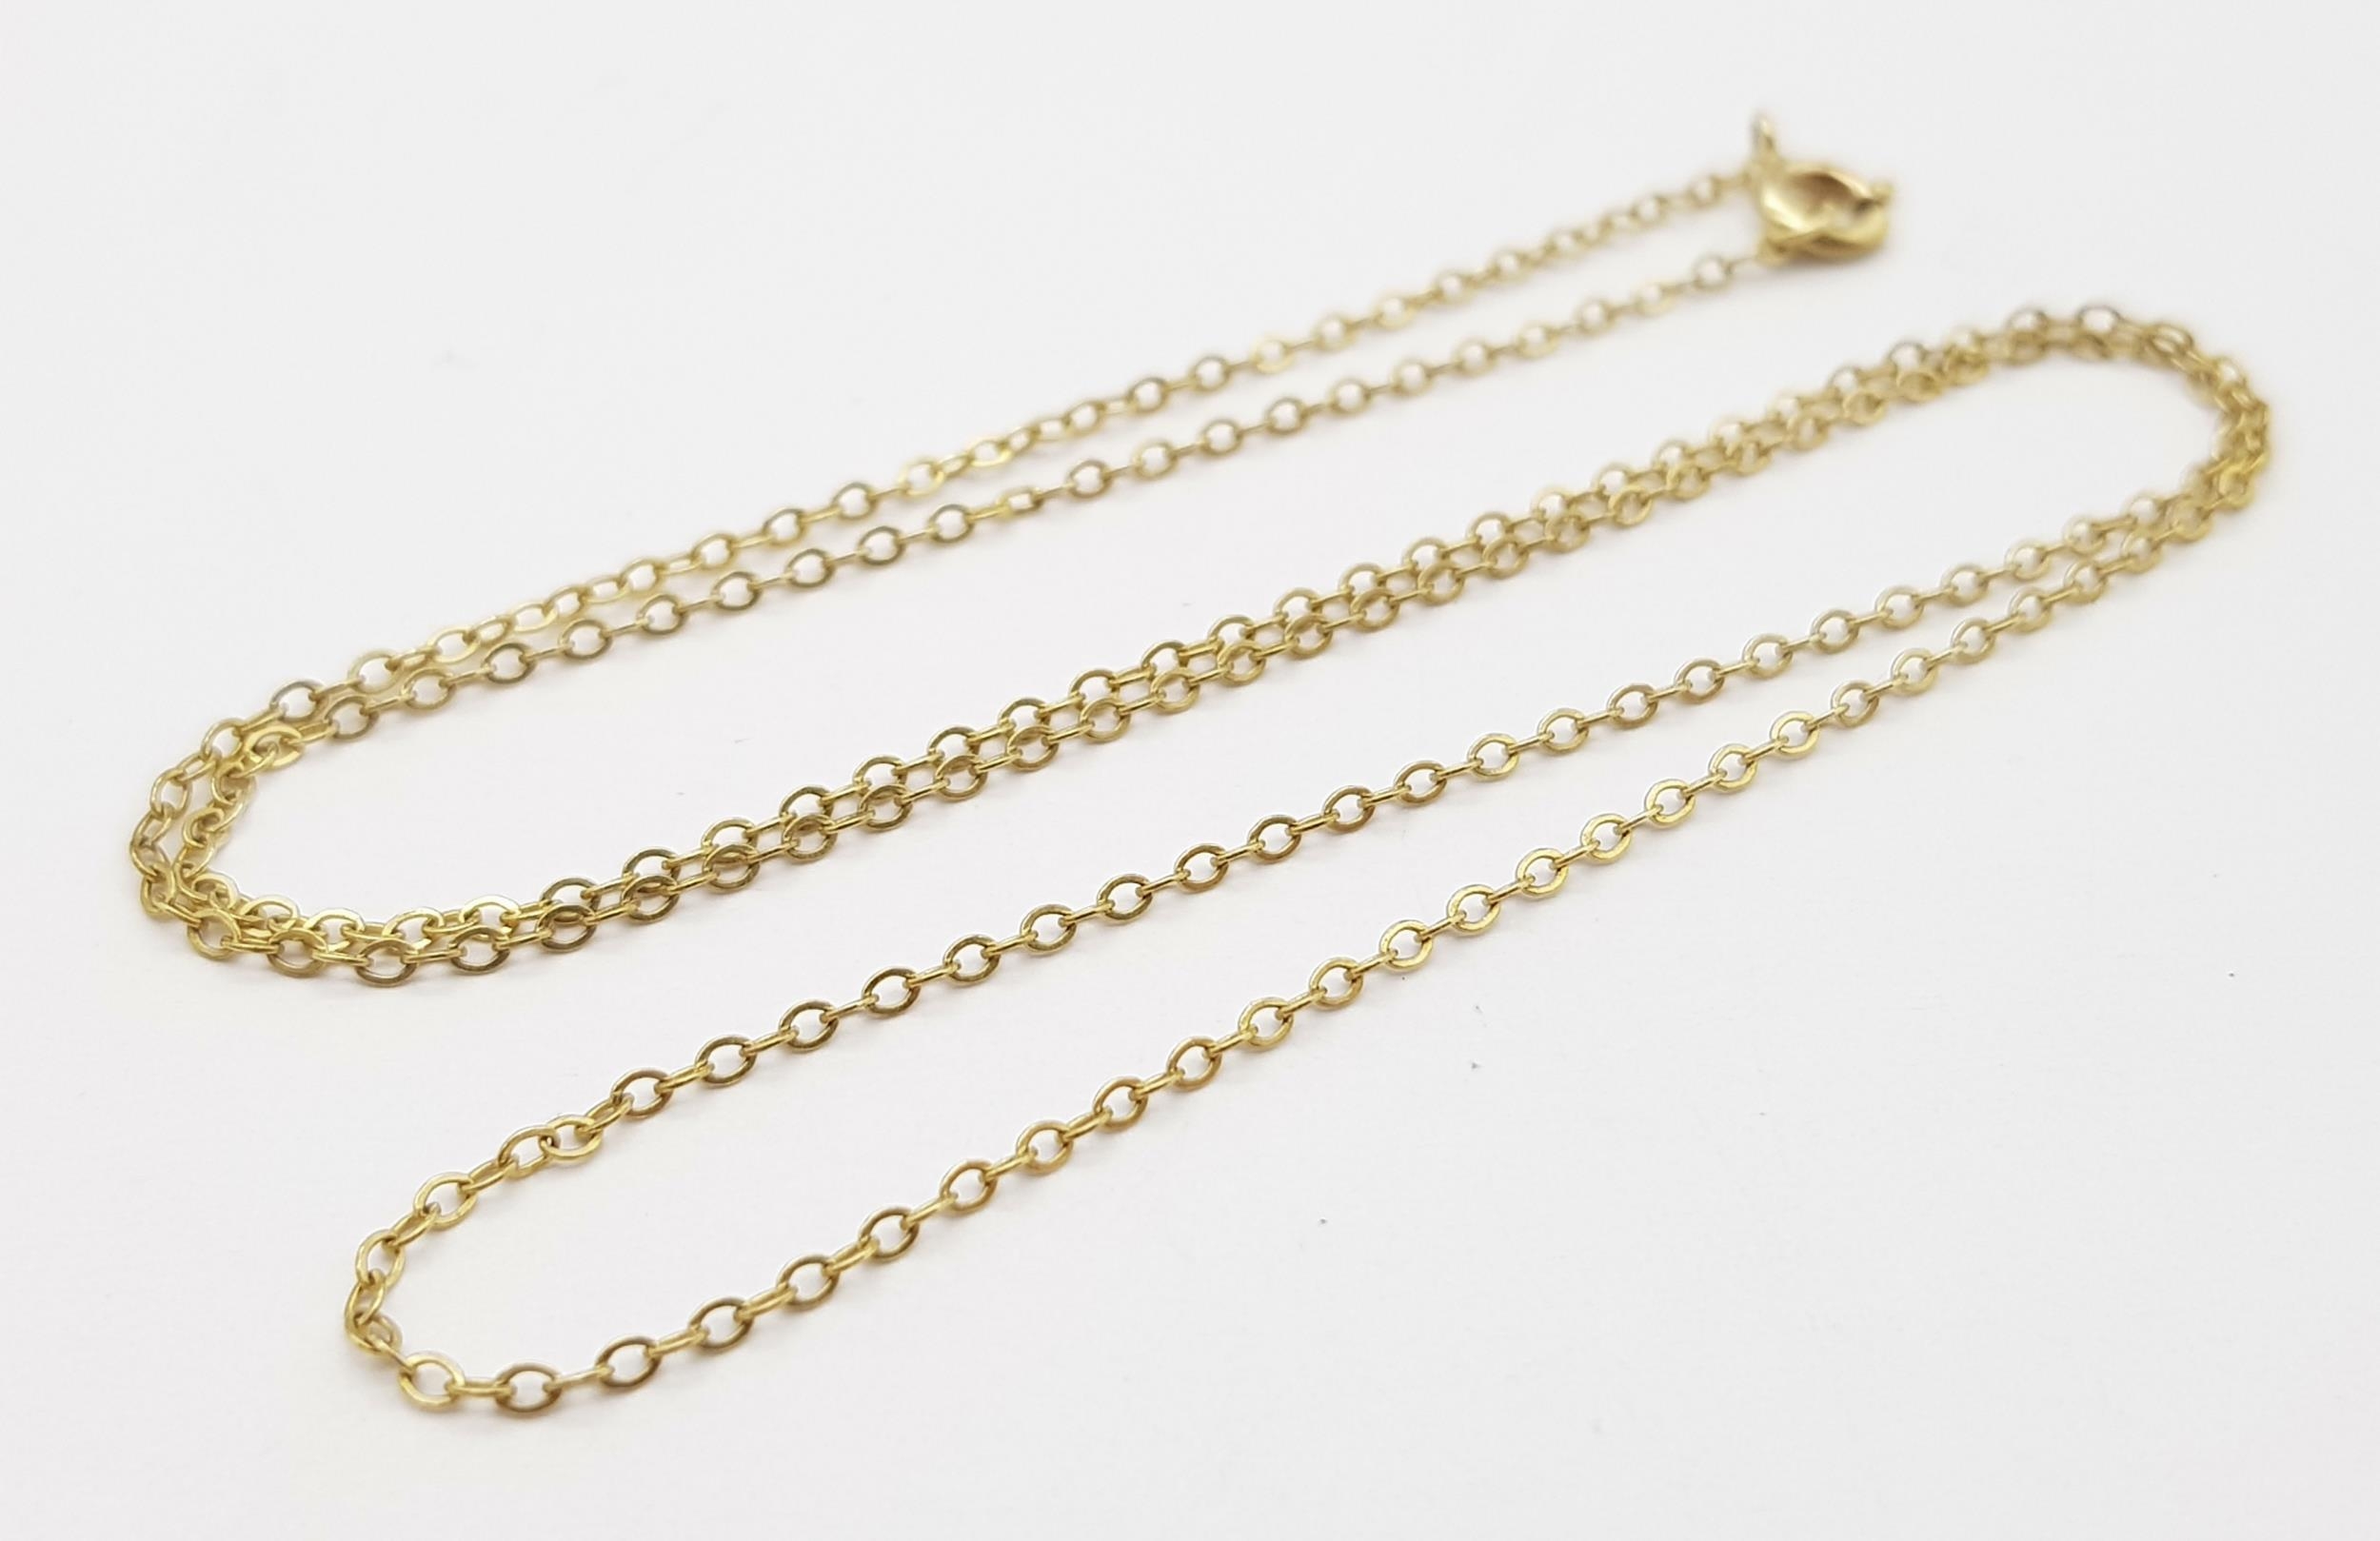 A 9K Yellow Gold Disappearing Necklace. 42cm. 0.9g - Image 3 of 5